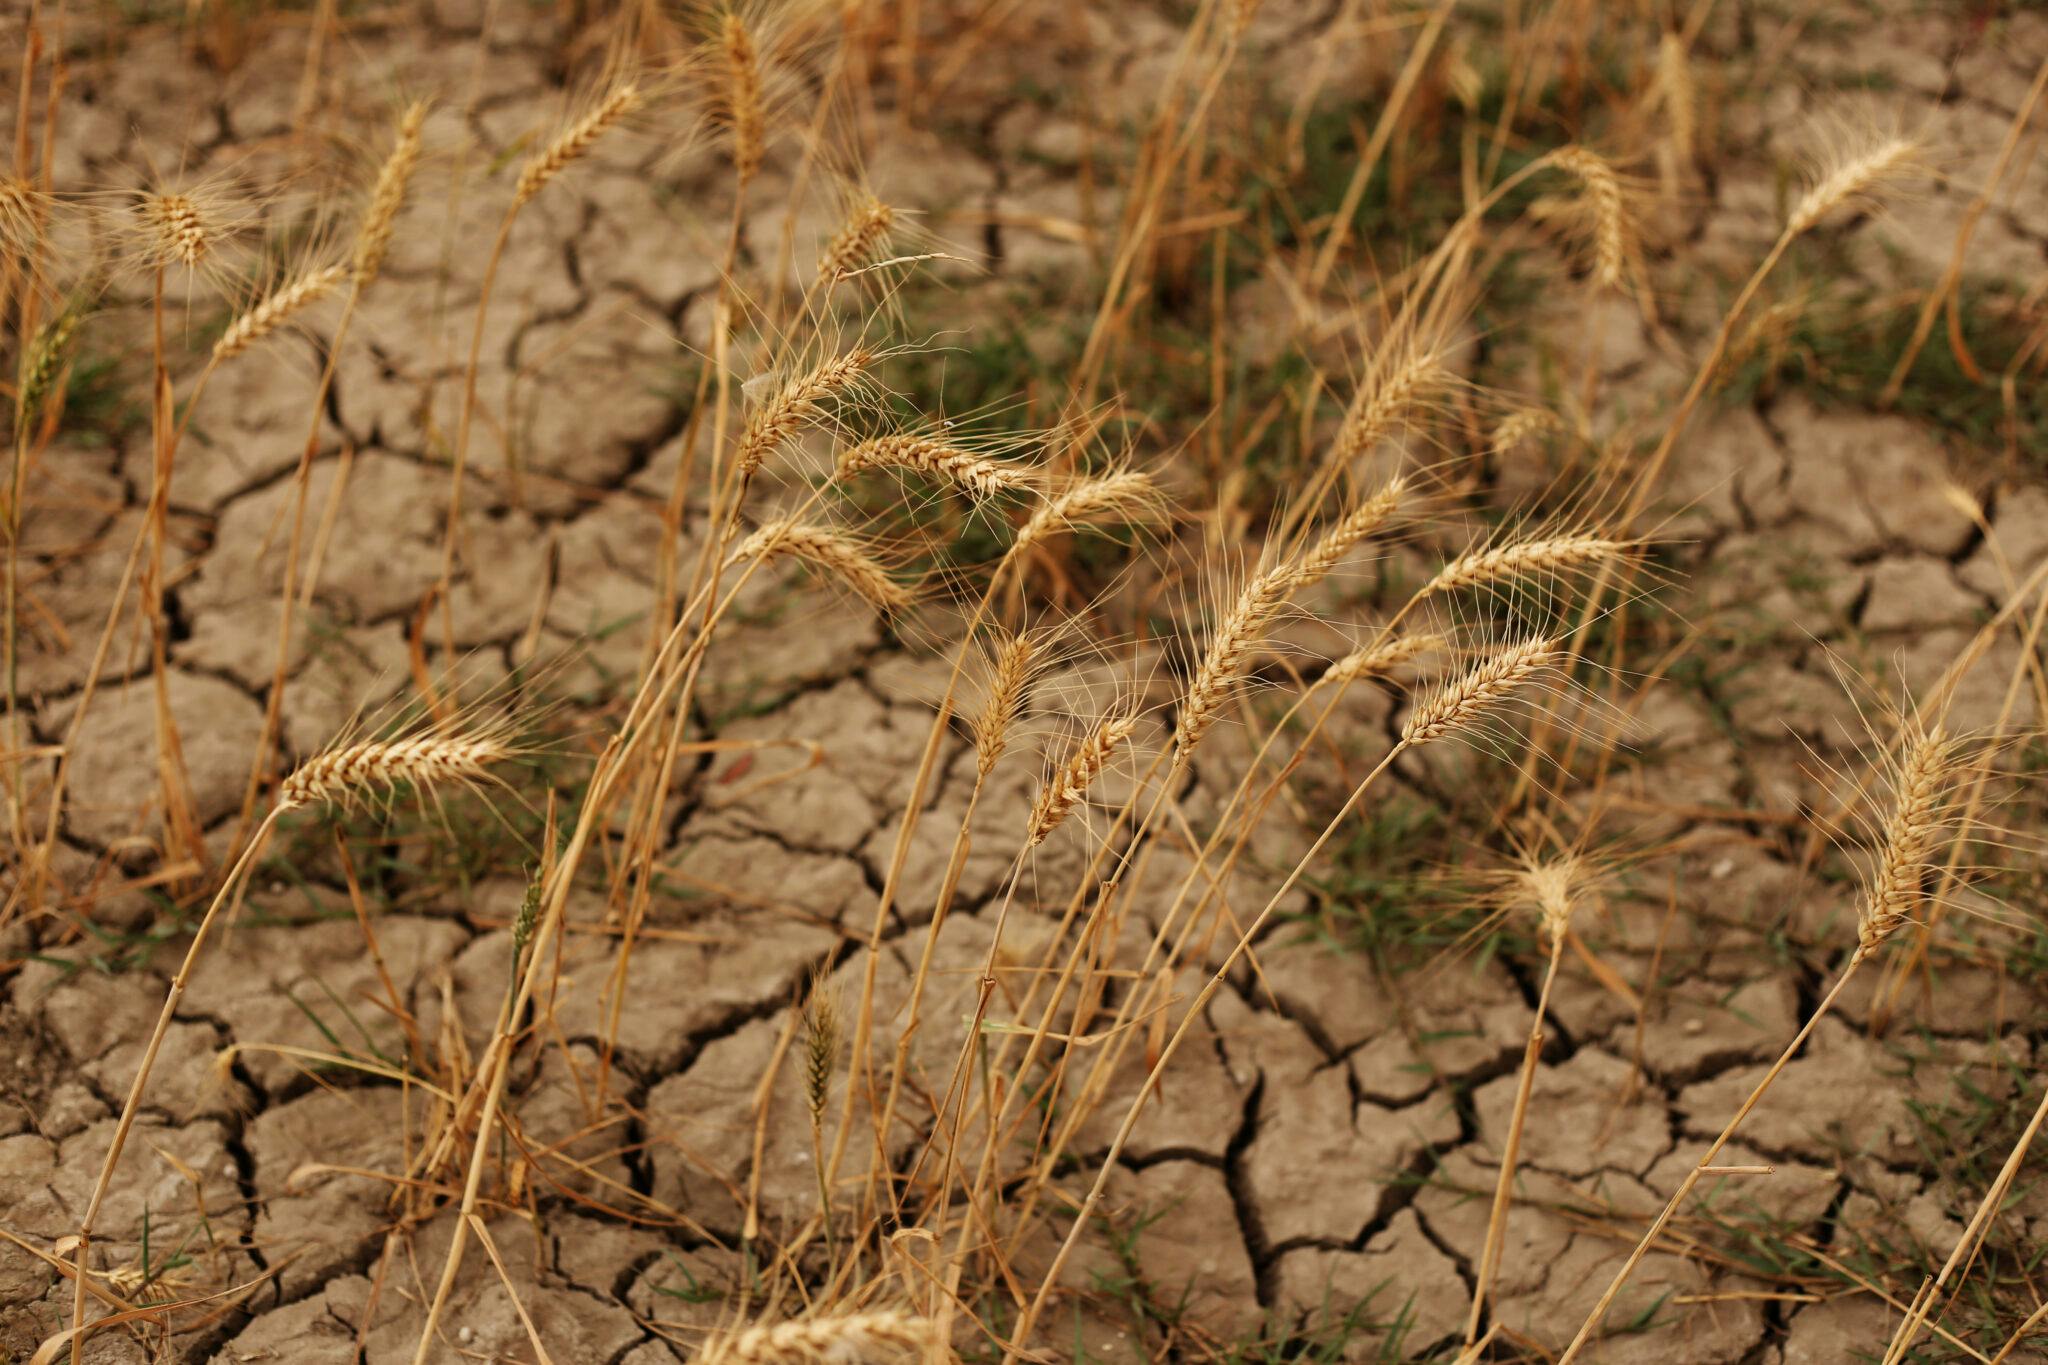 A dry cracked close up of the ground with sprigs of dry wheat growing out of it sporatically